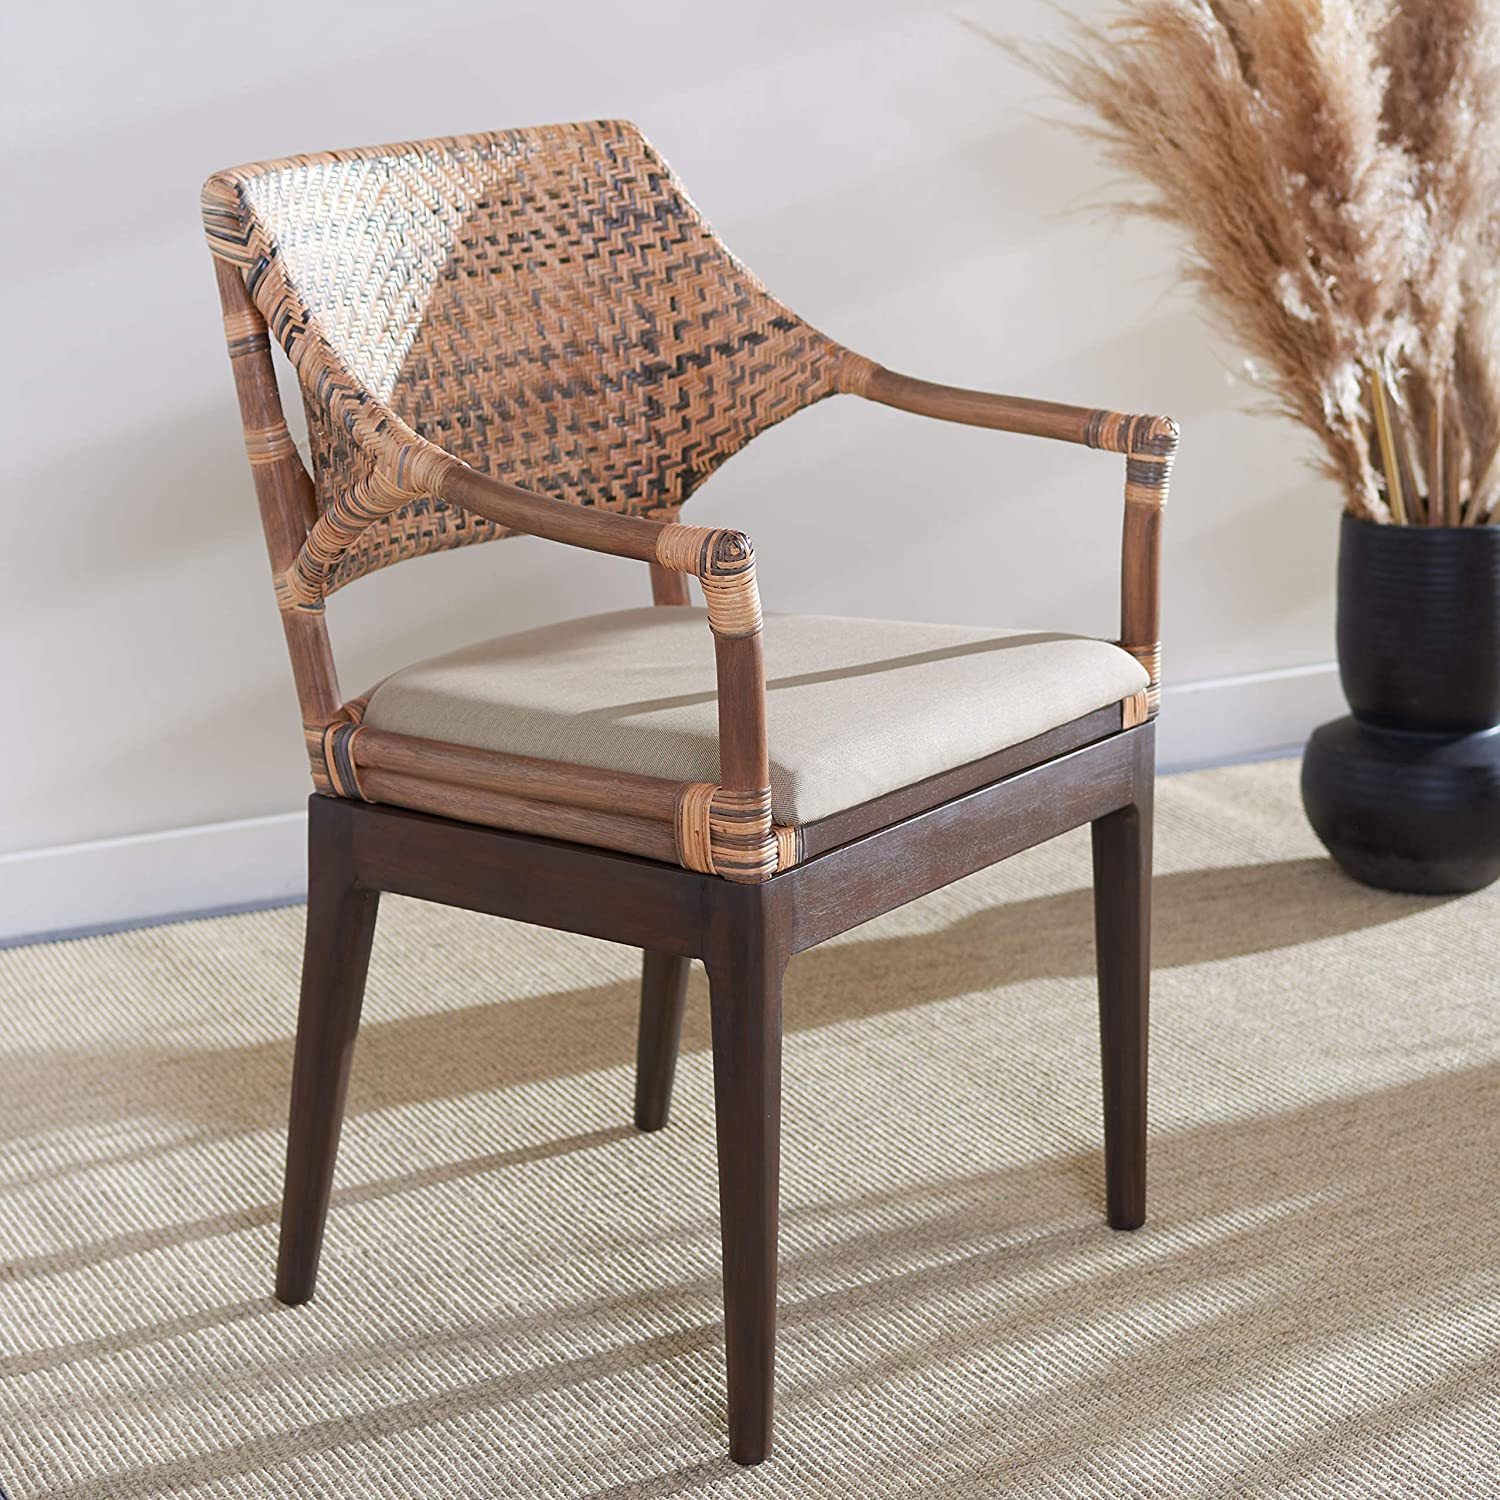 Carlo Arm Chair, Honey, From The Safavieh Home Collection. - $348.98